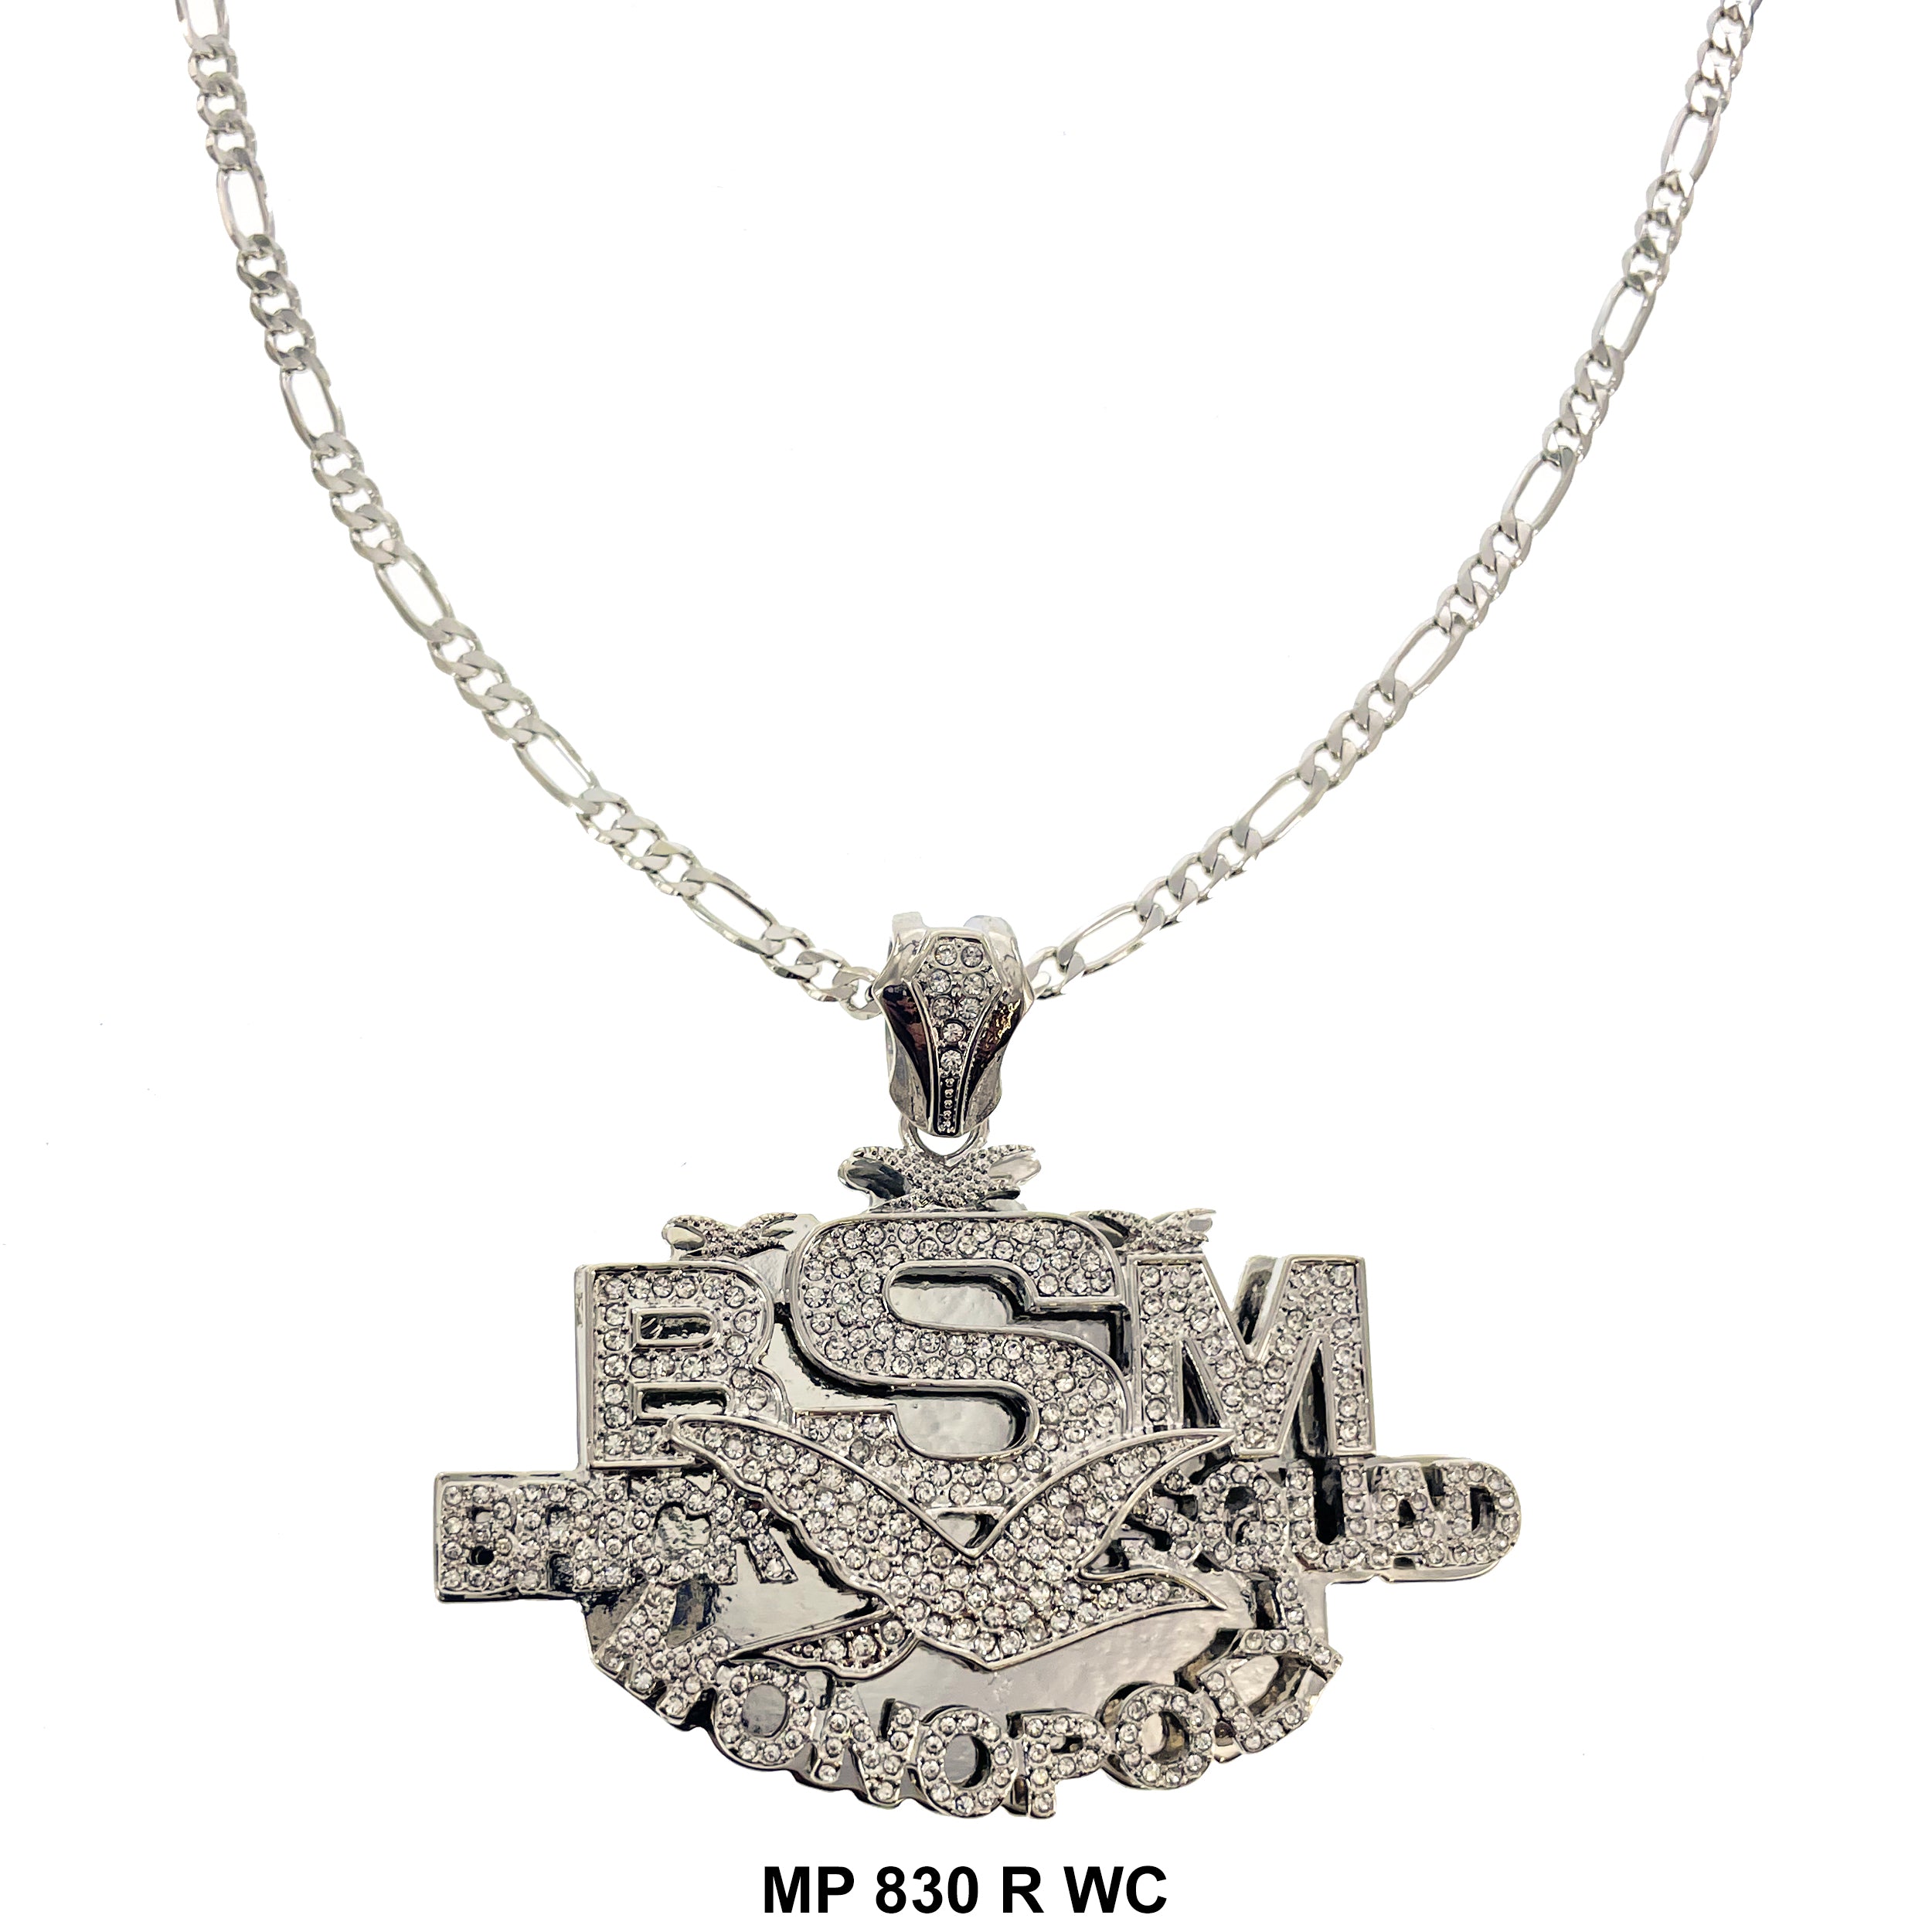 Bsm Pendant With Chain MP 830 R WC